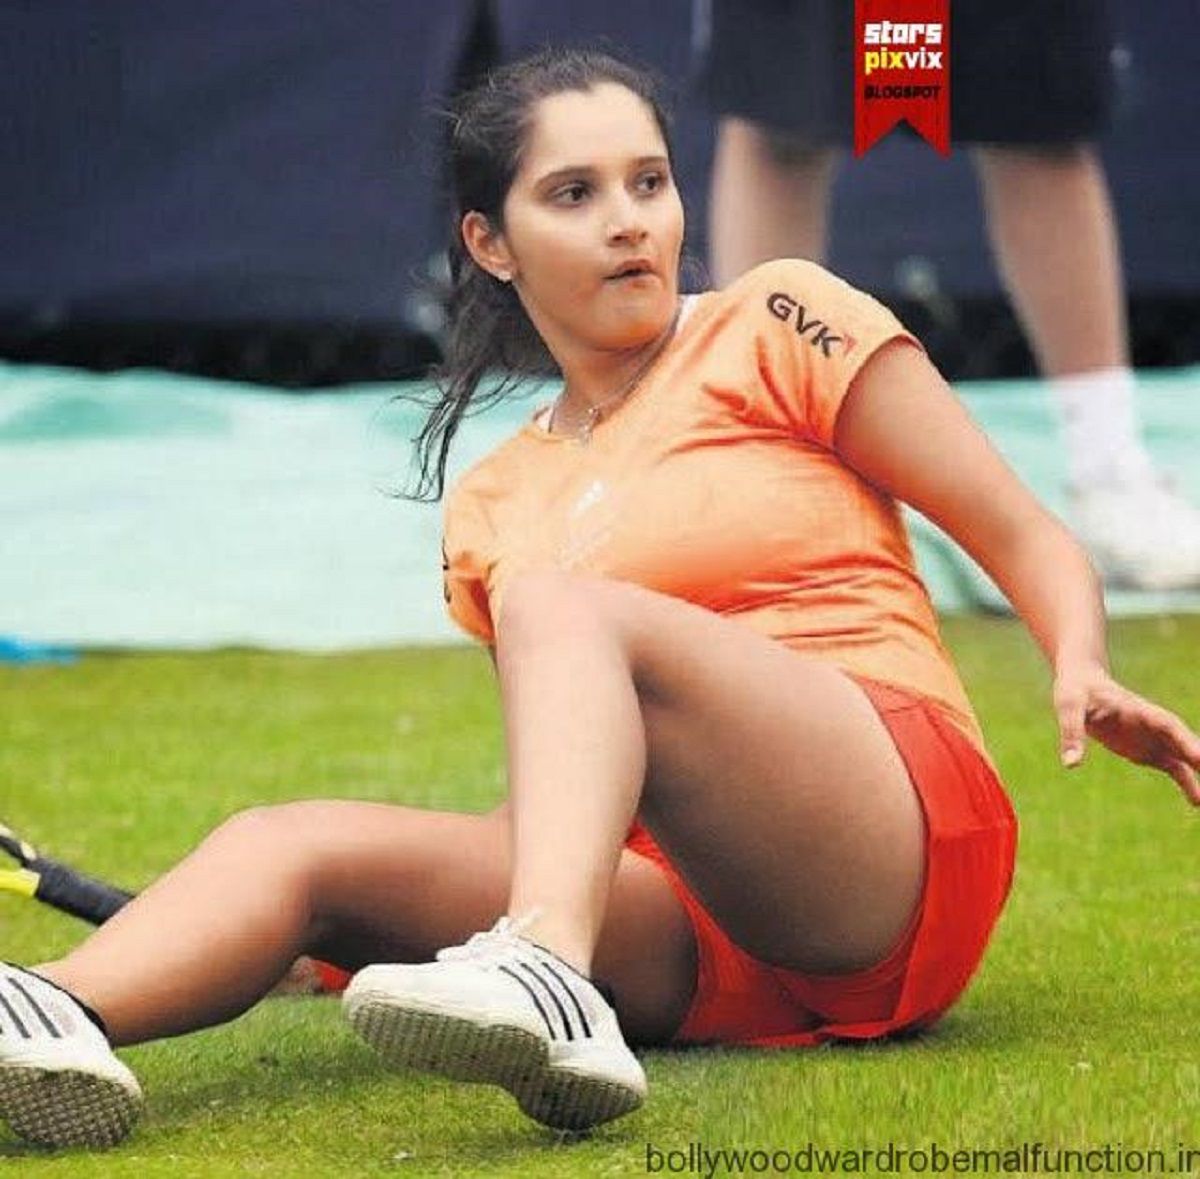 10 Pictures of Sania Mirza which caused controversies